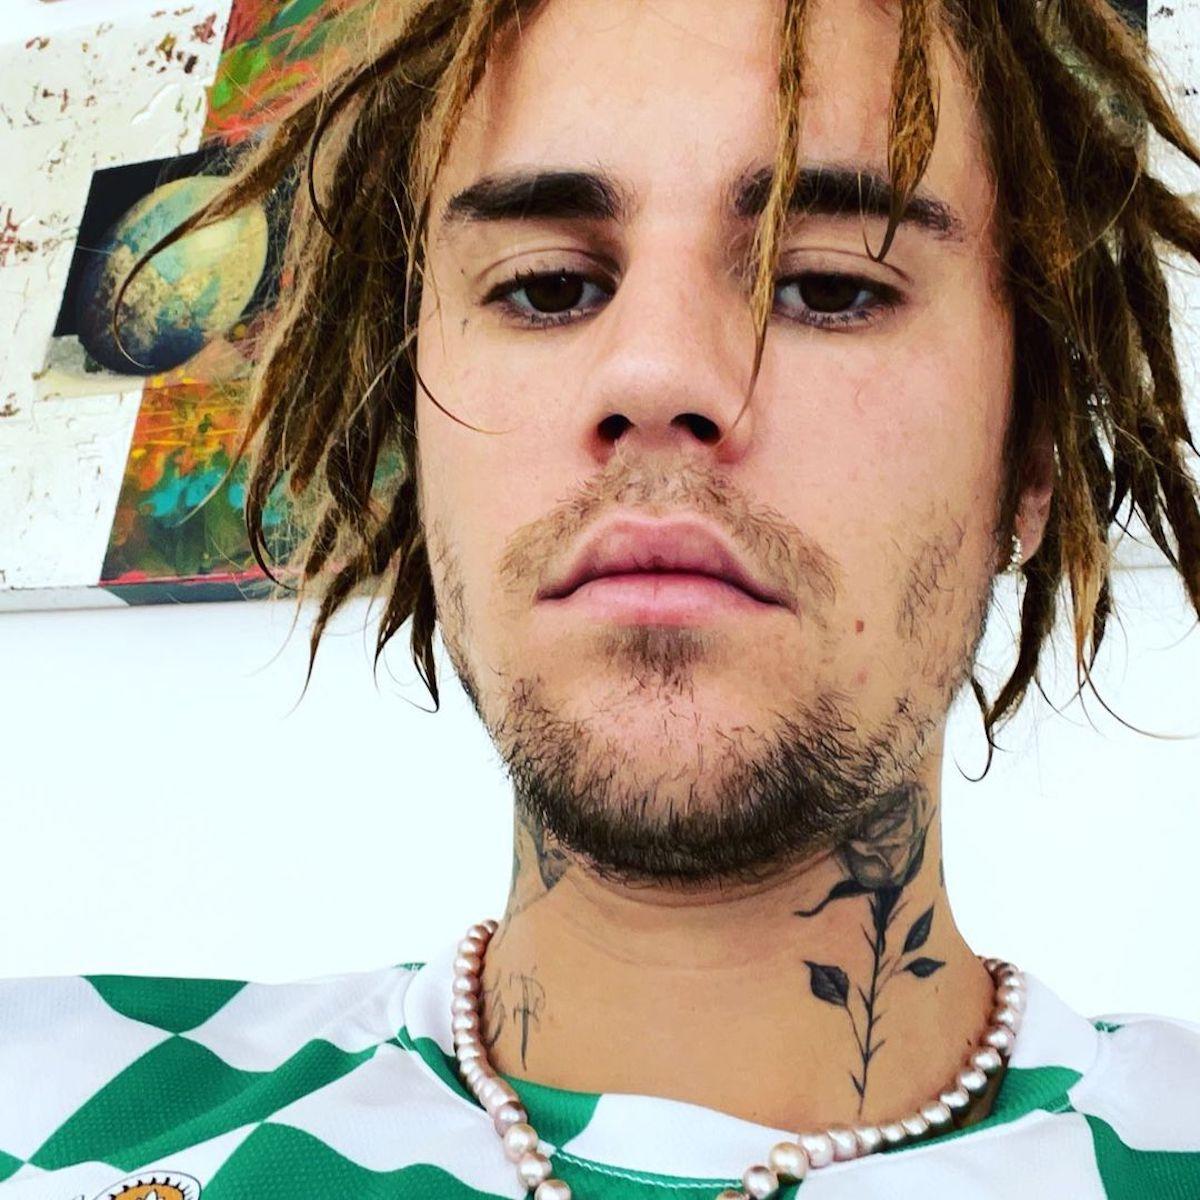 Justin Bieber's Dreads Elicited Accusations of Cultural Appropriation